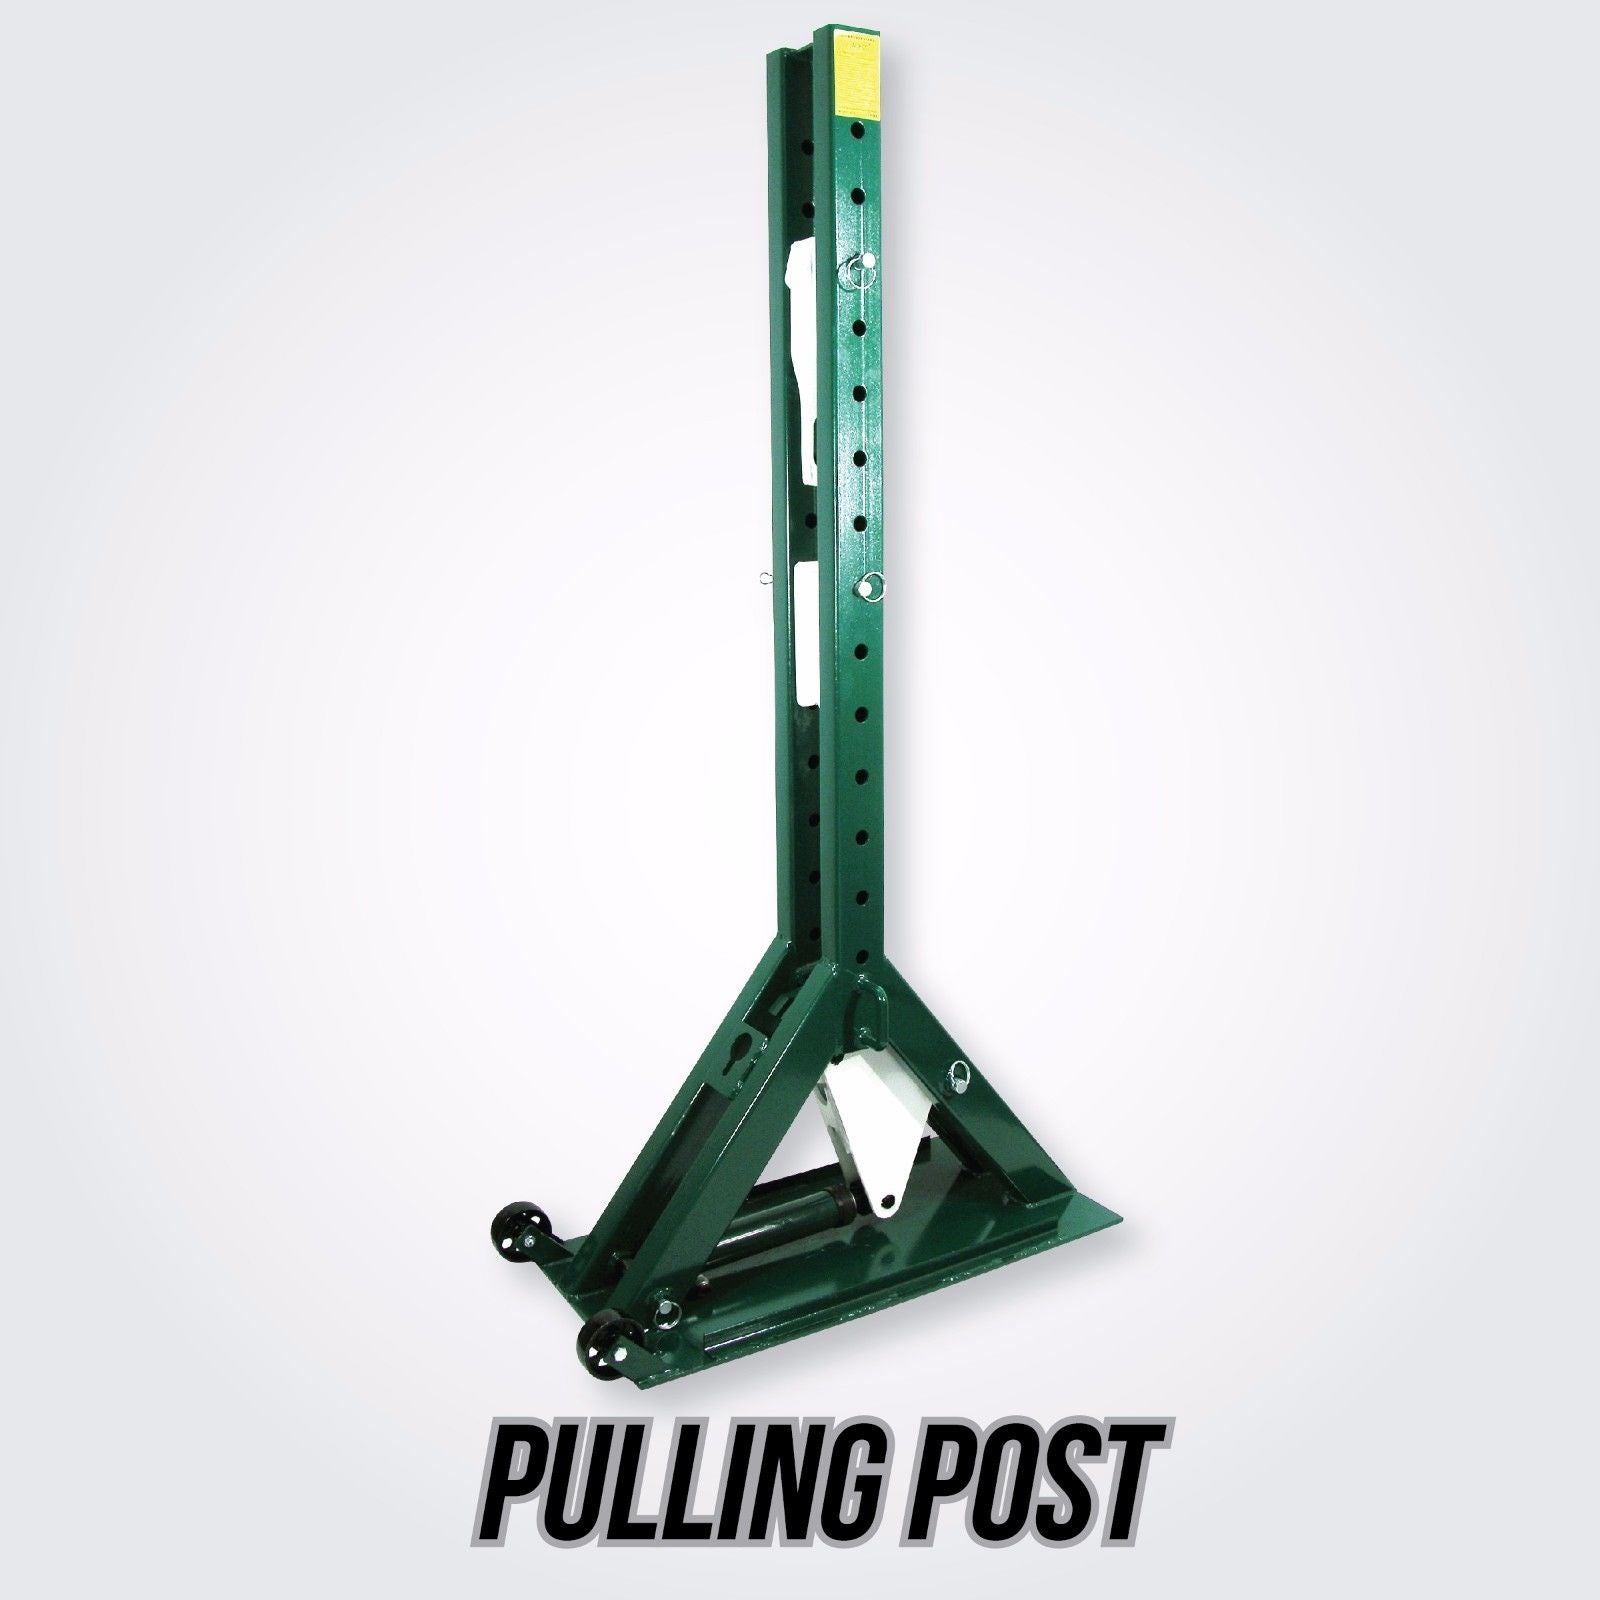 Jackco 10 Ton - Pulling Power Post 68" Tall with Pump, 6ft Hose & 10 Ton Ram